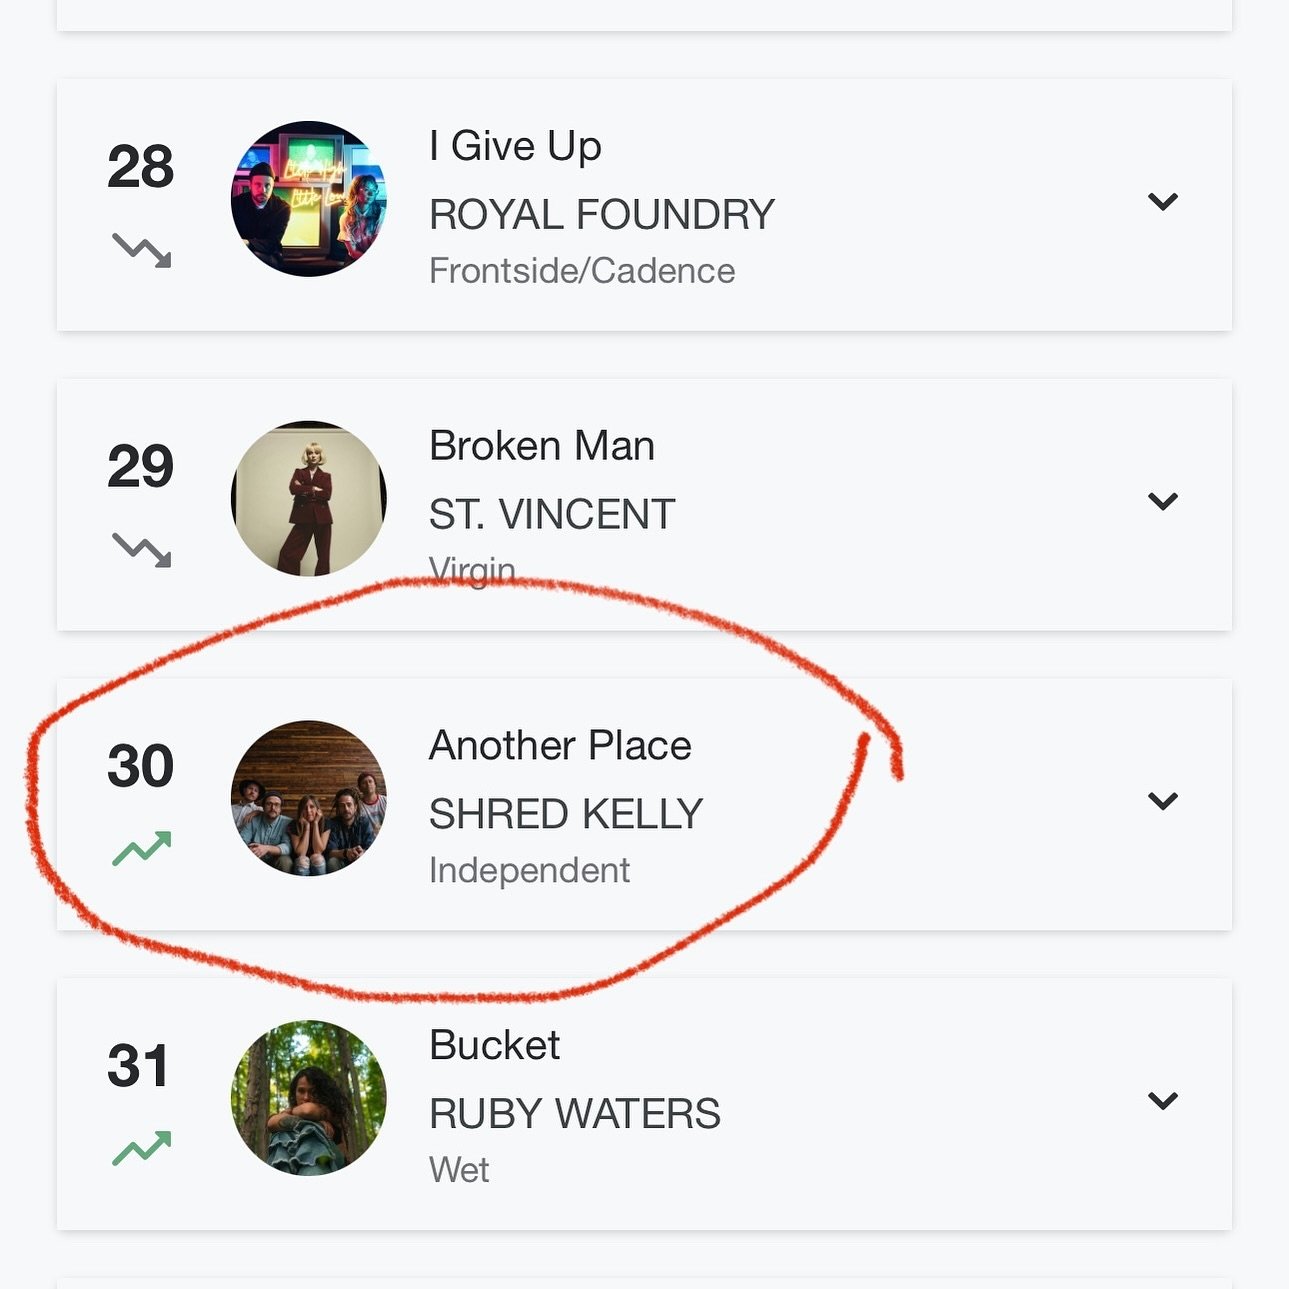 WE LOVE SEEING TOP 30!! 🤘
Congrats to @shredkelly and a huge THANK YOU to Canadian rock radio for spinning this great track! 

#canadianradio #top30 #indieartist #canadianrock